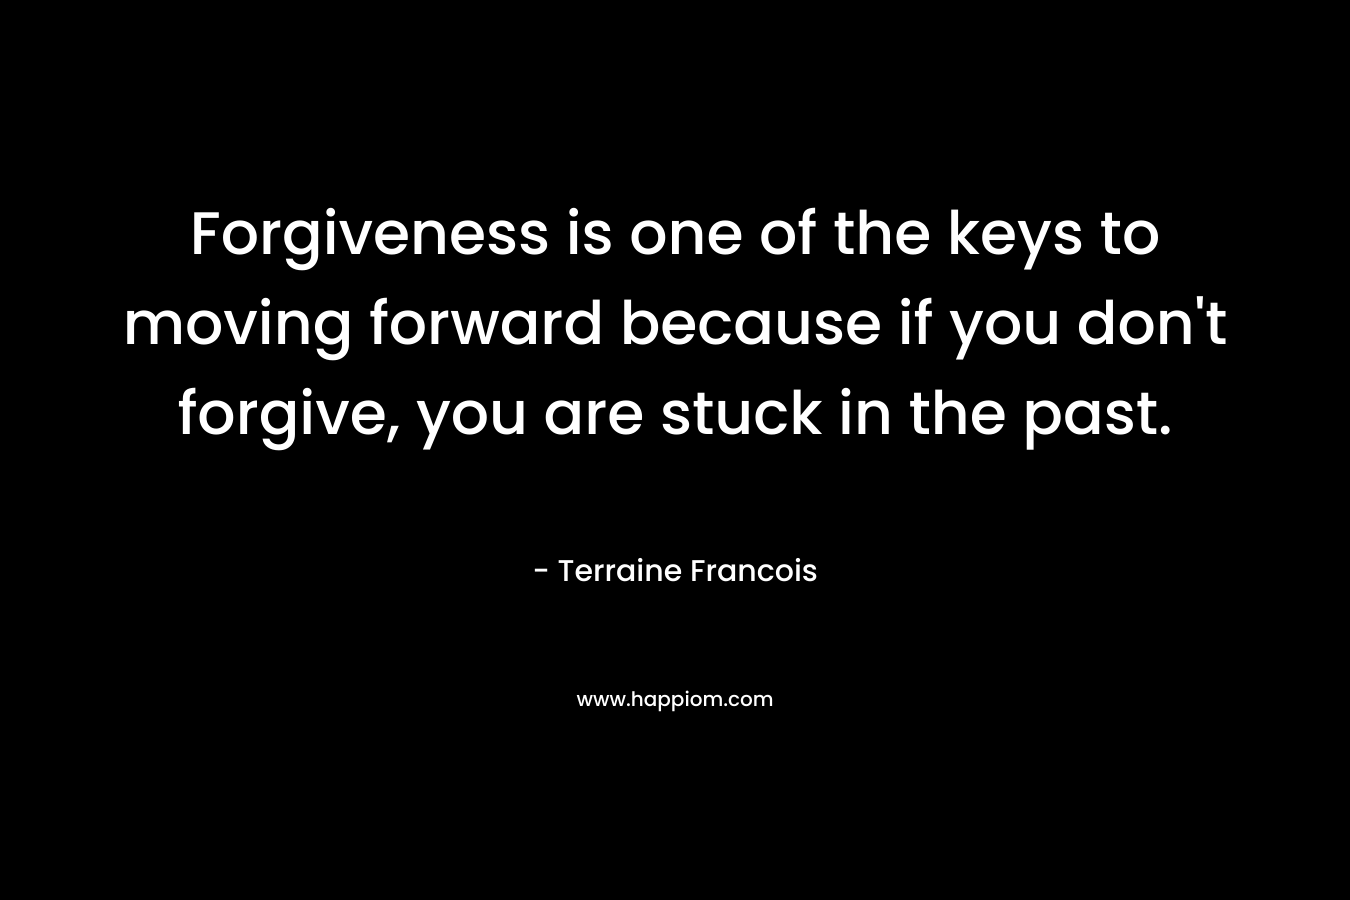 Forgiveness is one of the keys to moving forward because if you don't forgive, you are stuck in the past.